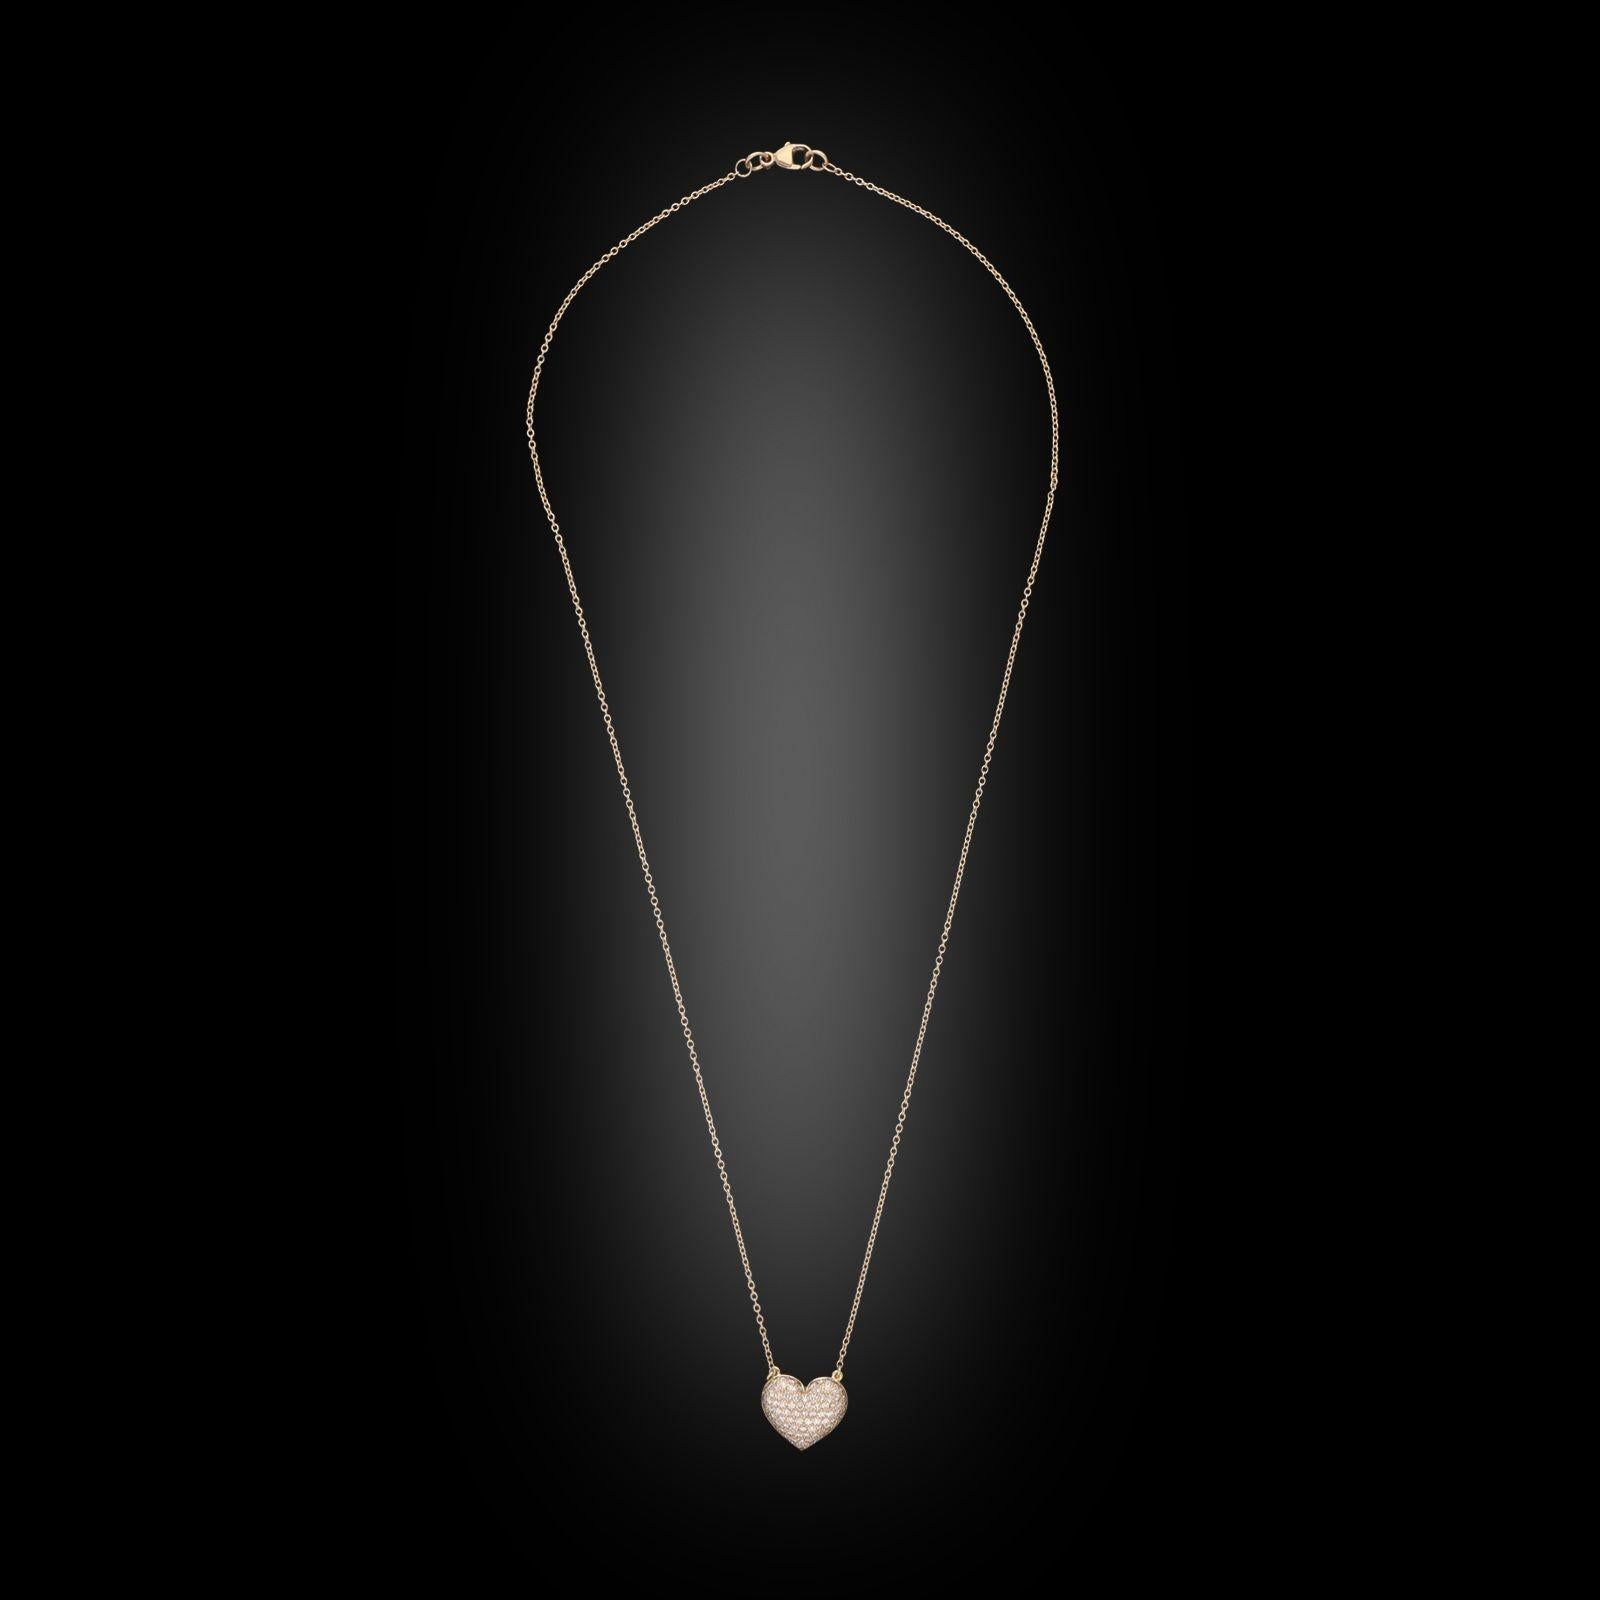 A pink diamond and rose gold heart shaped pendant by Hancocks, the heart with domed profile pavé set across the front with single cut pink diamonds in 18ct rose gold, suspended from a fixed 18” rose gold trace chain. This sweet pendant would make a